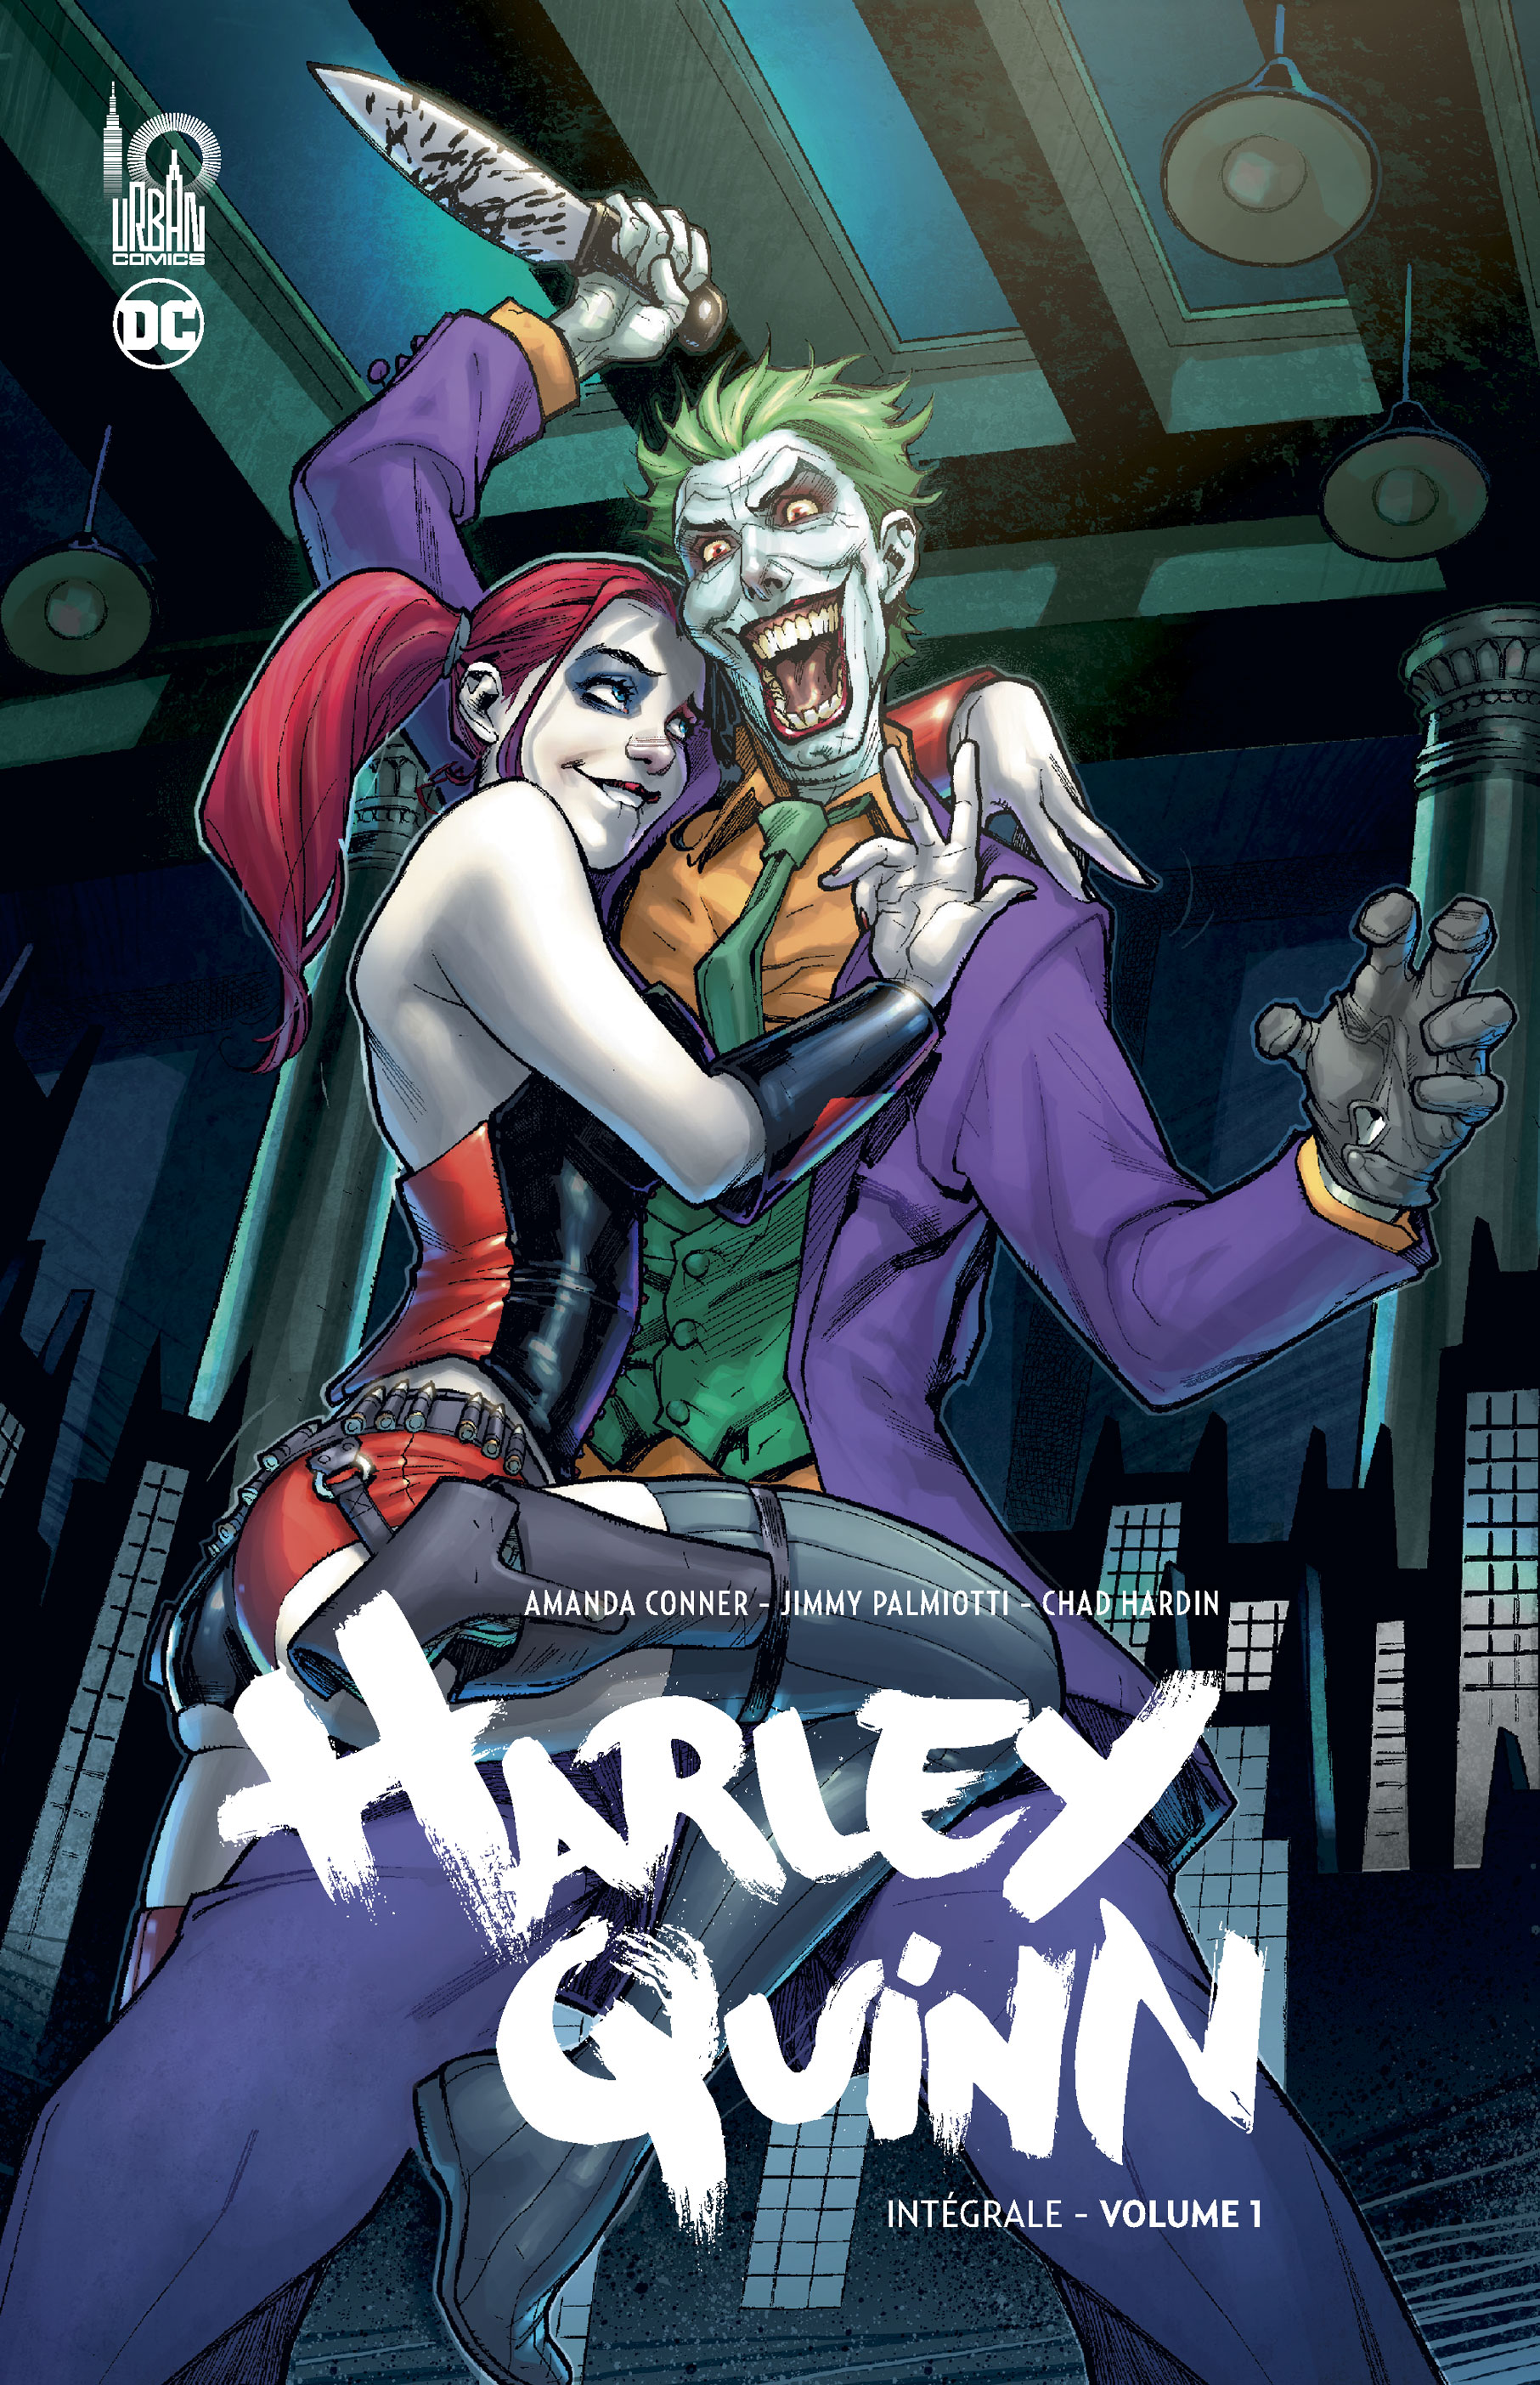 Harley Quinn intégrale – Tome 1 - couv